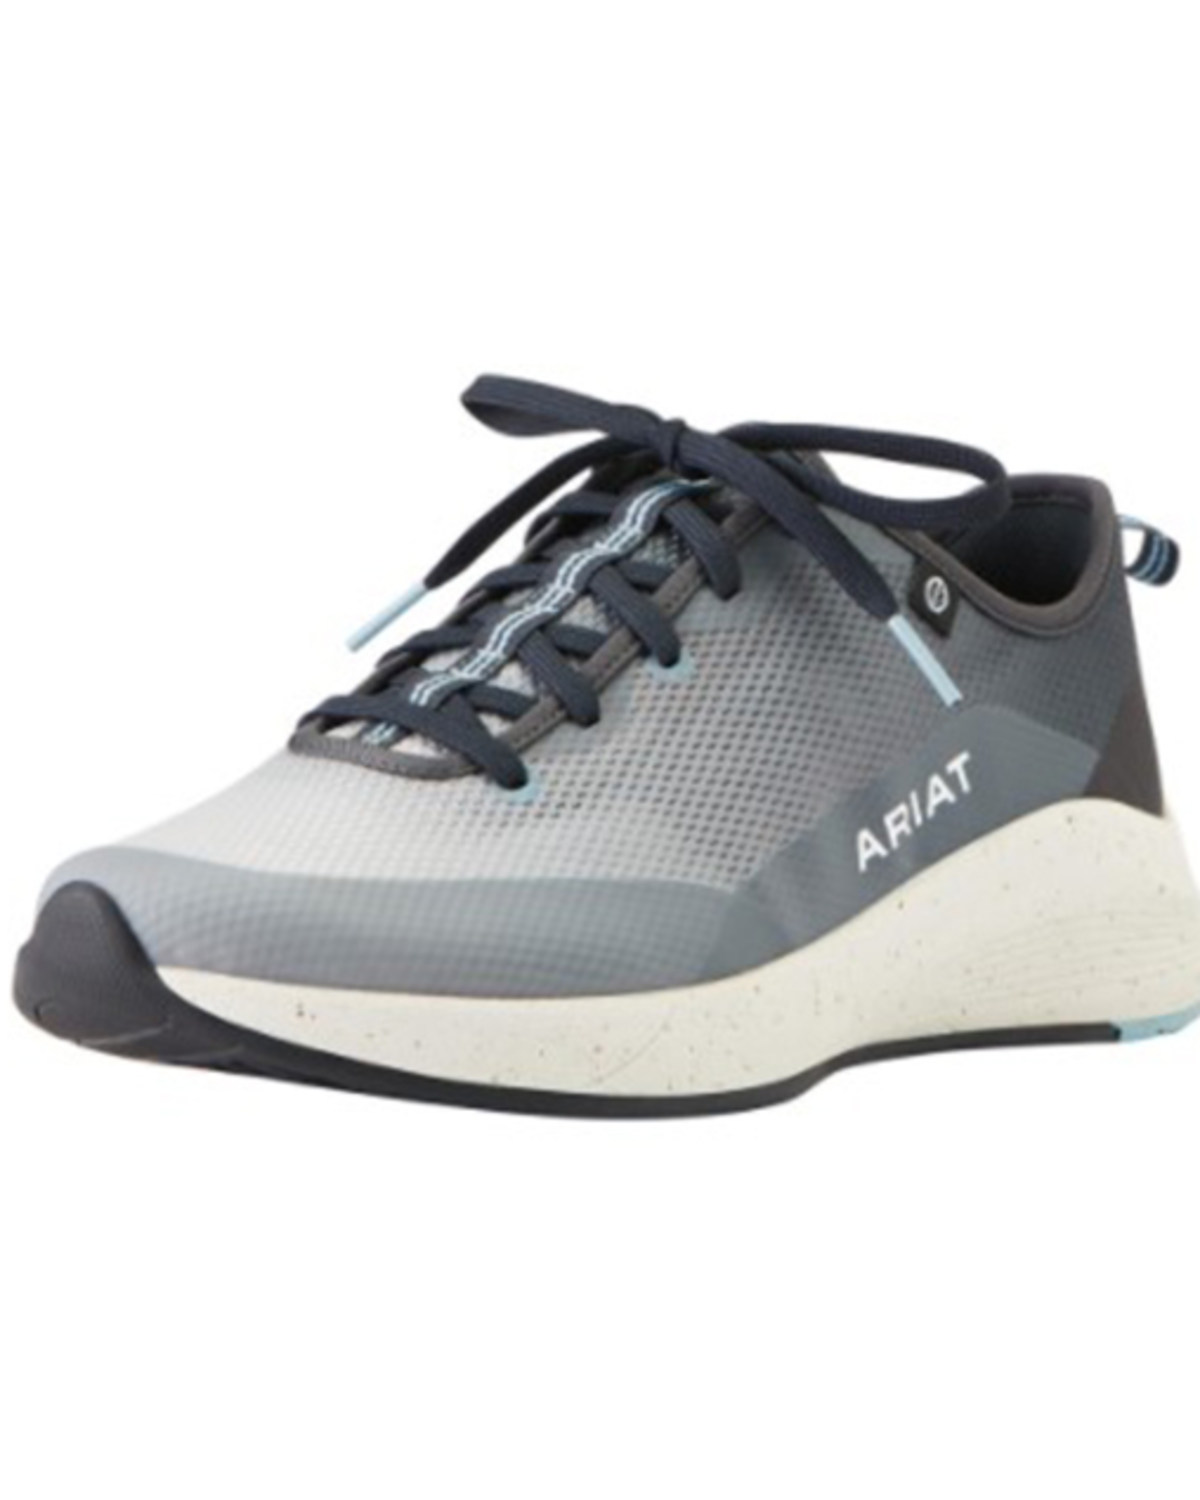 Ariat Men's Shiftrunner Lace-Up Work Sneaker - Round Toe